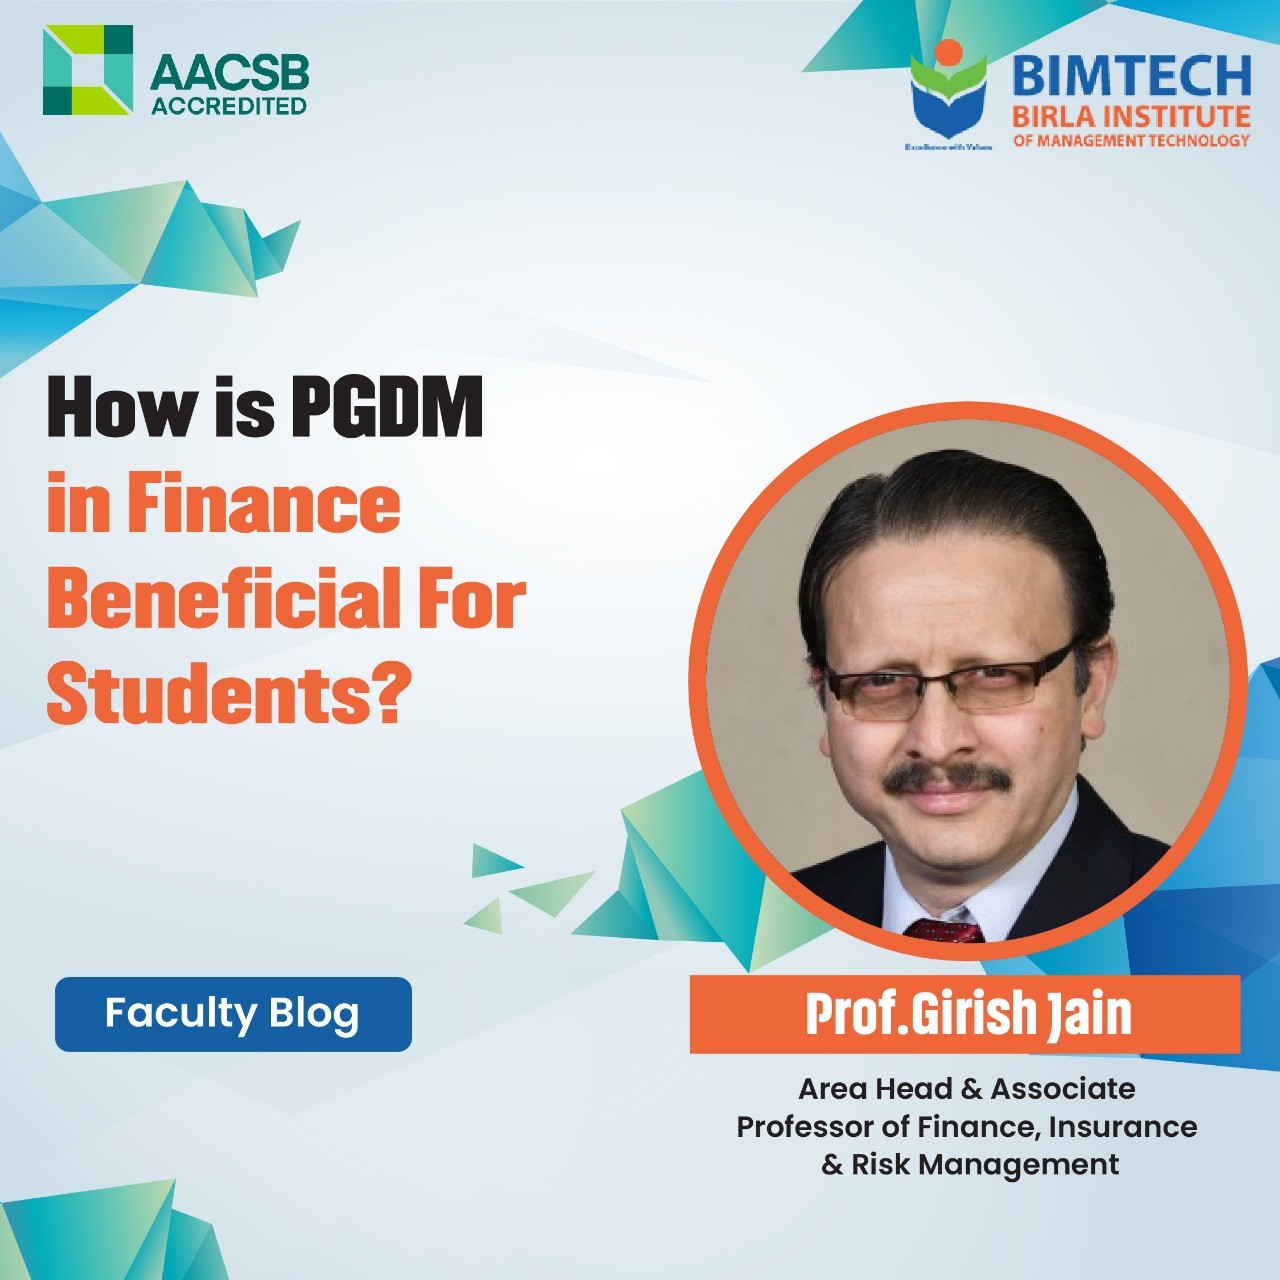 How is PGDM in Finance Beneficial for Students?